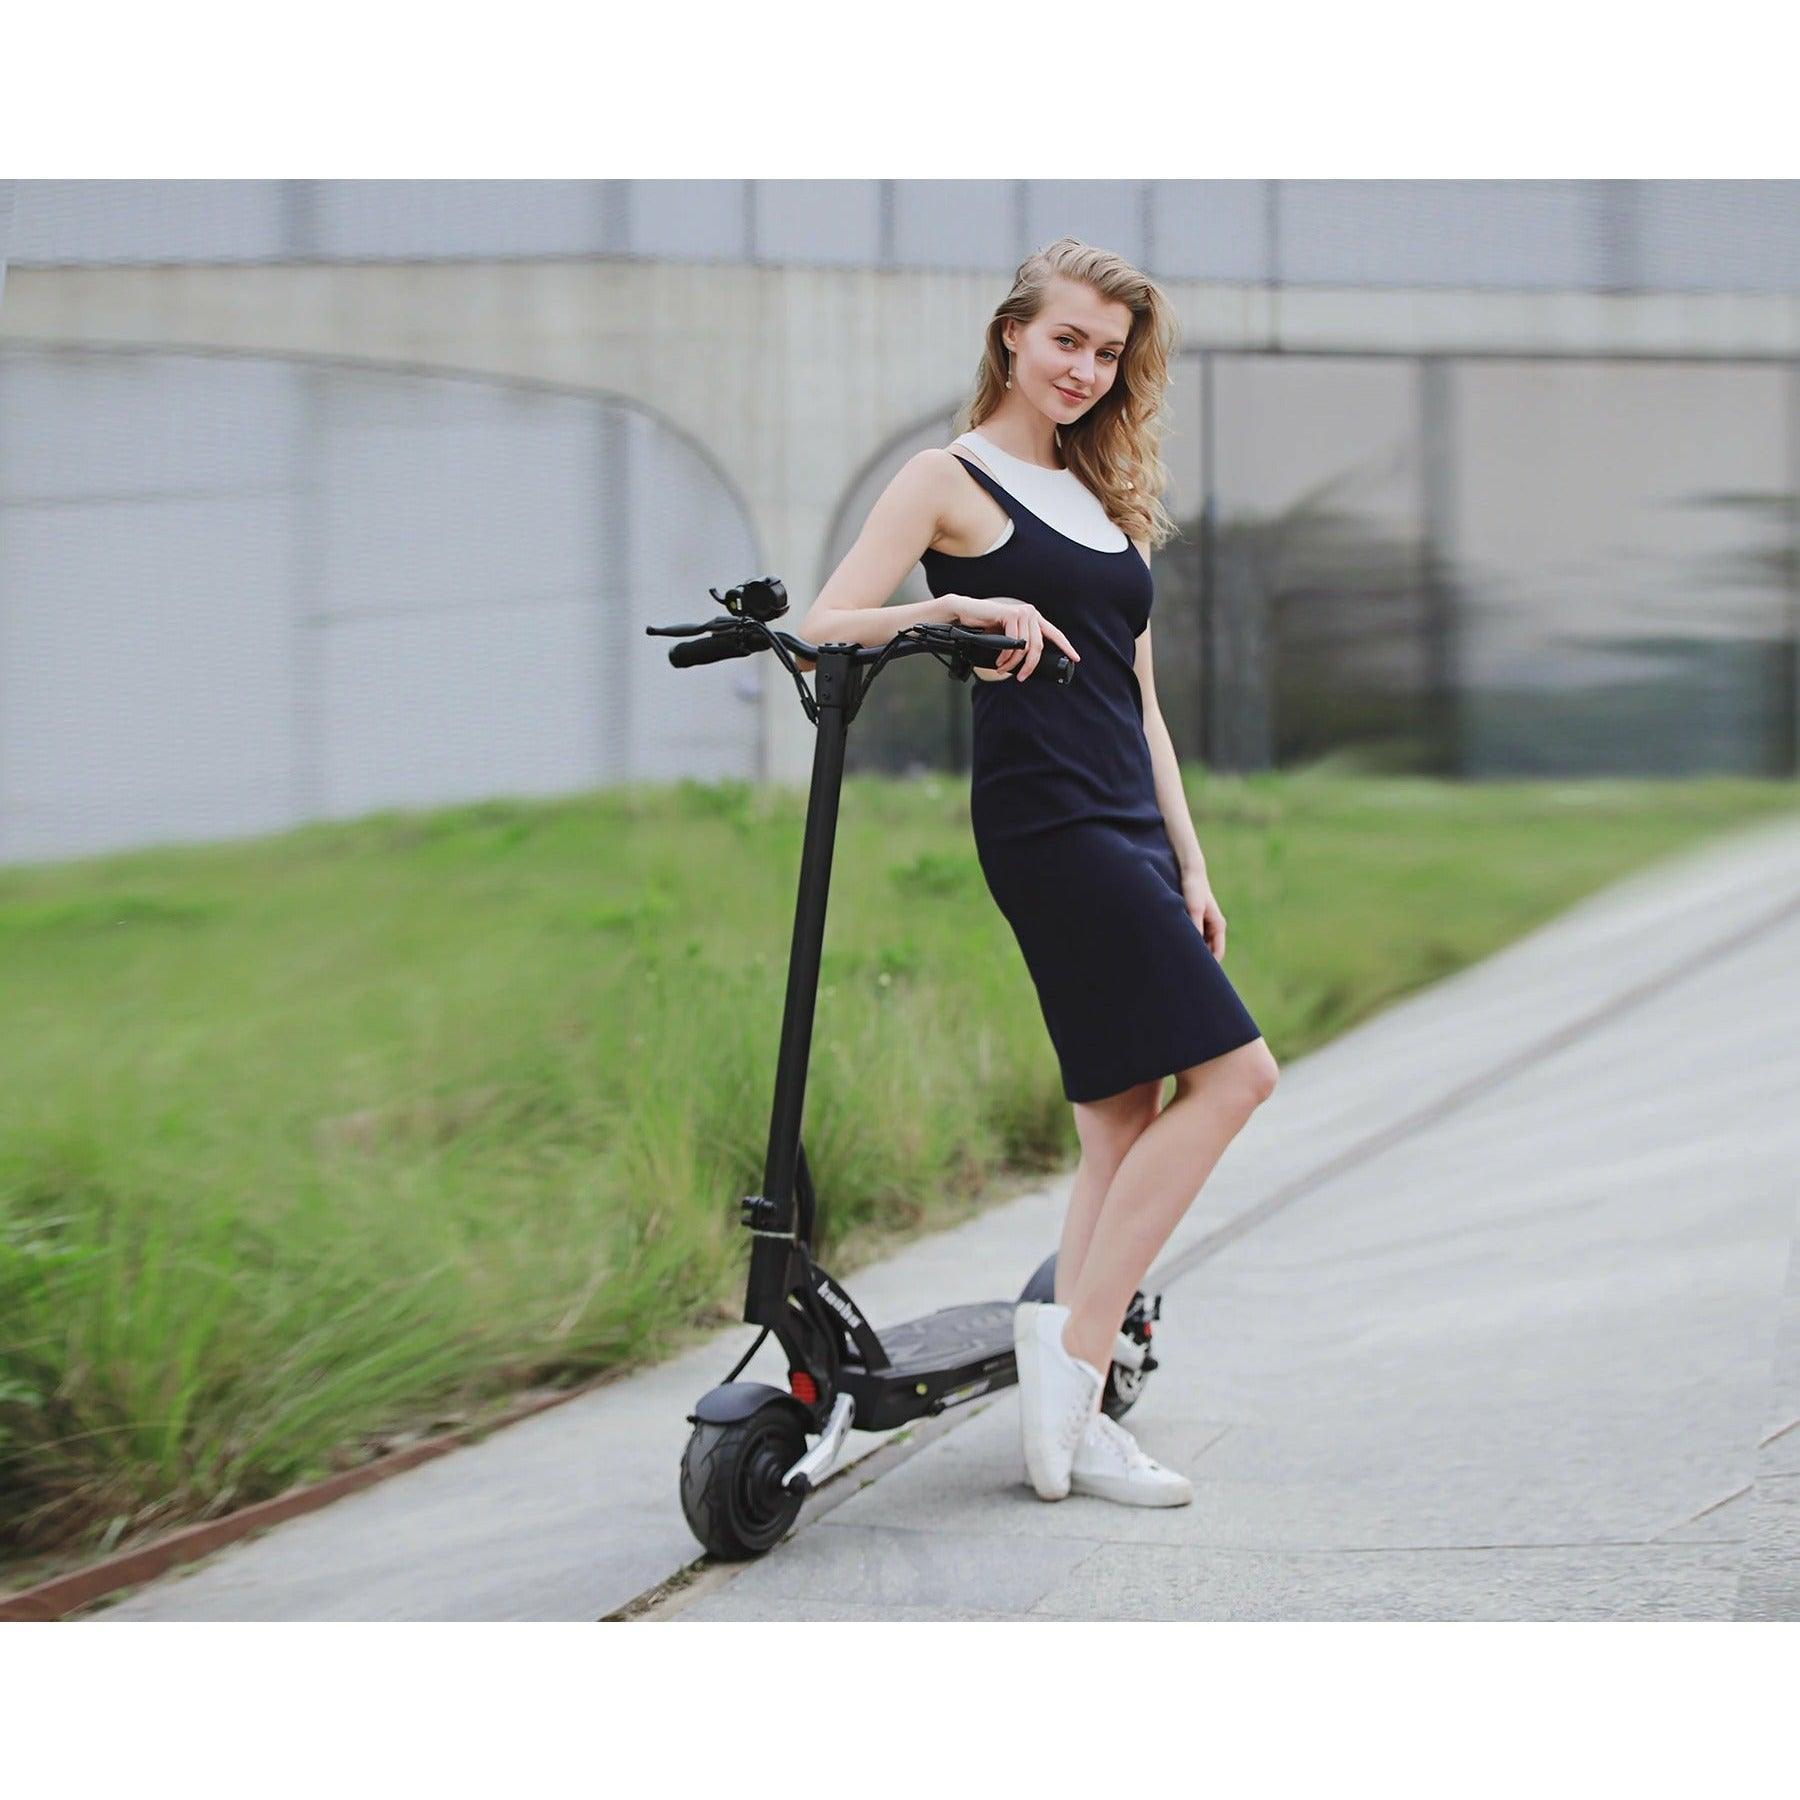 KAABO Mantis 10 Base V2 (2022) - Electric Scooter - Scooters - Electric Monkey NZ